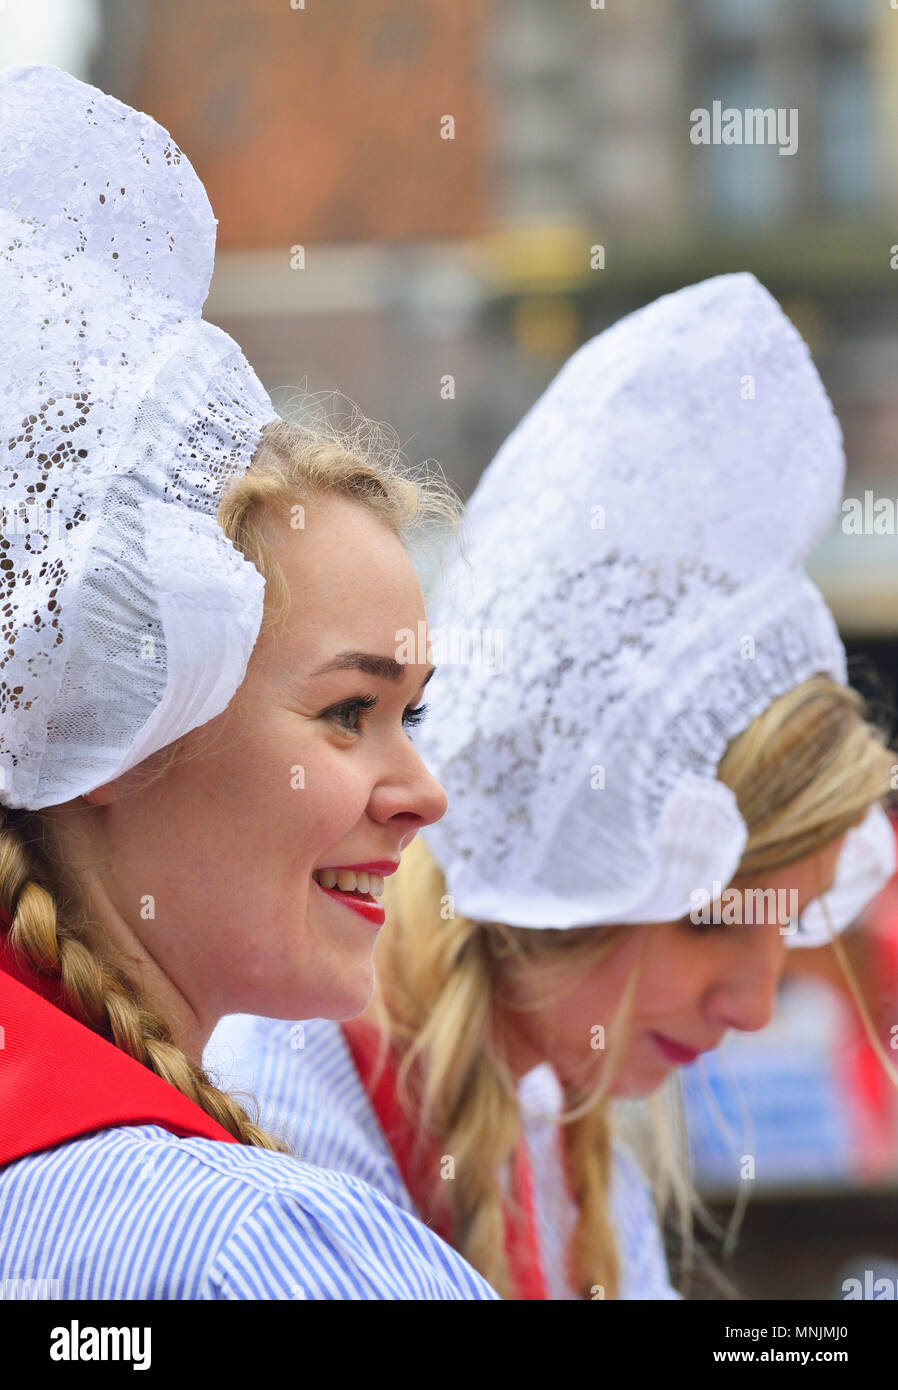 Dutch girls in traditional  costume at the cheese market in Alkmaar Cheese Market, Holland 'cheese girls' sells samples at the Alkmaar Cheese market Stock Photo